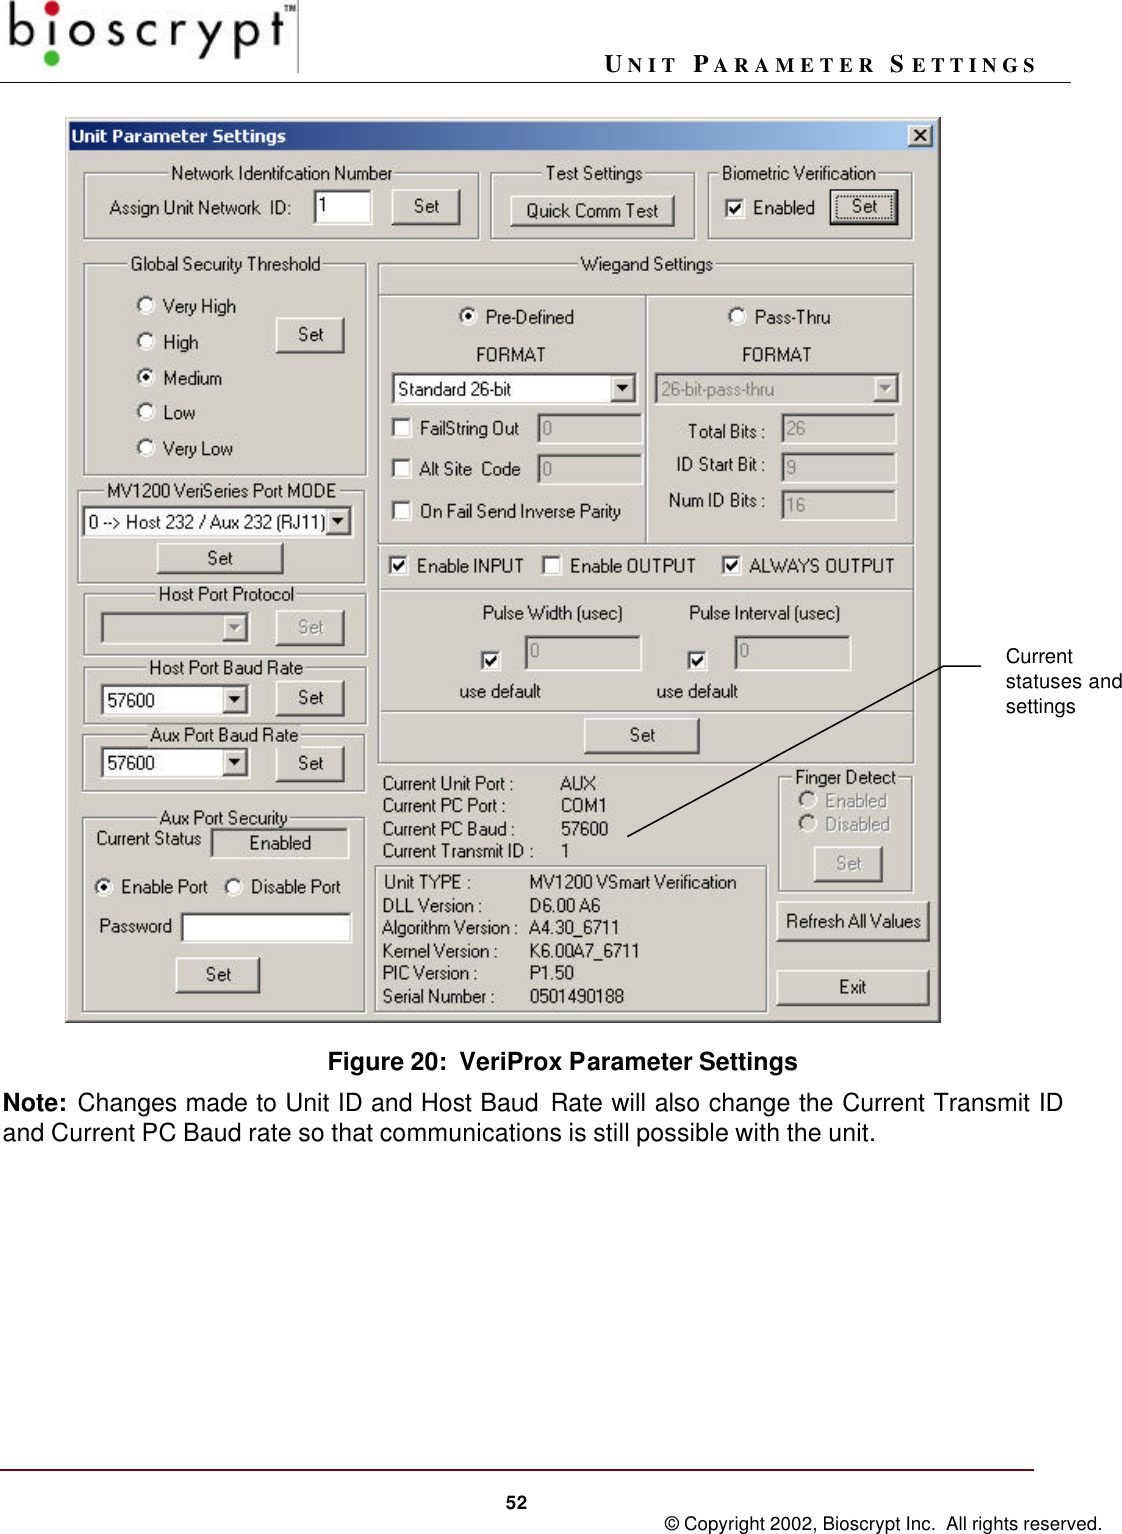 UNIT PARAMETER SETTINGS52 © Copyright 2002, Bioscrypt Inc.  All rights reserved. Figure 20:  VeriProx Parameter SettingsNote: Changes made to Unit ID and Host Baud Rate will also change the Current Transmit IDand Current PC Baud rate so that communications is still possible with the unit.Currentstatuses andsettings